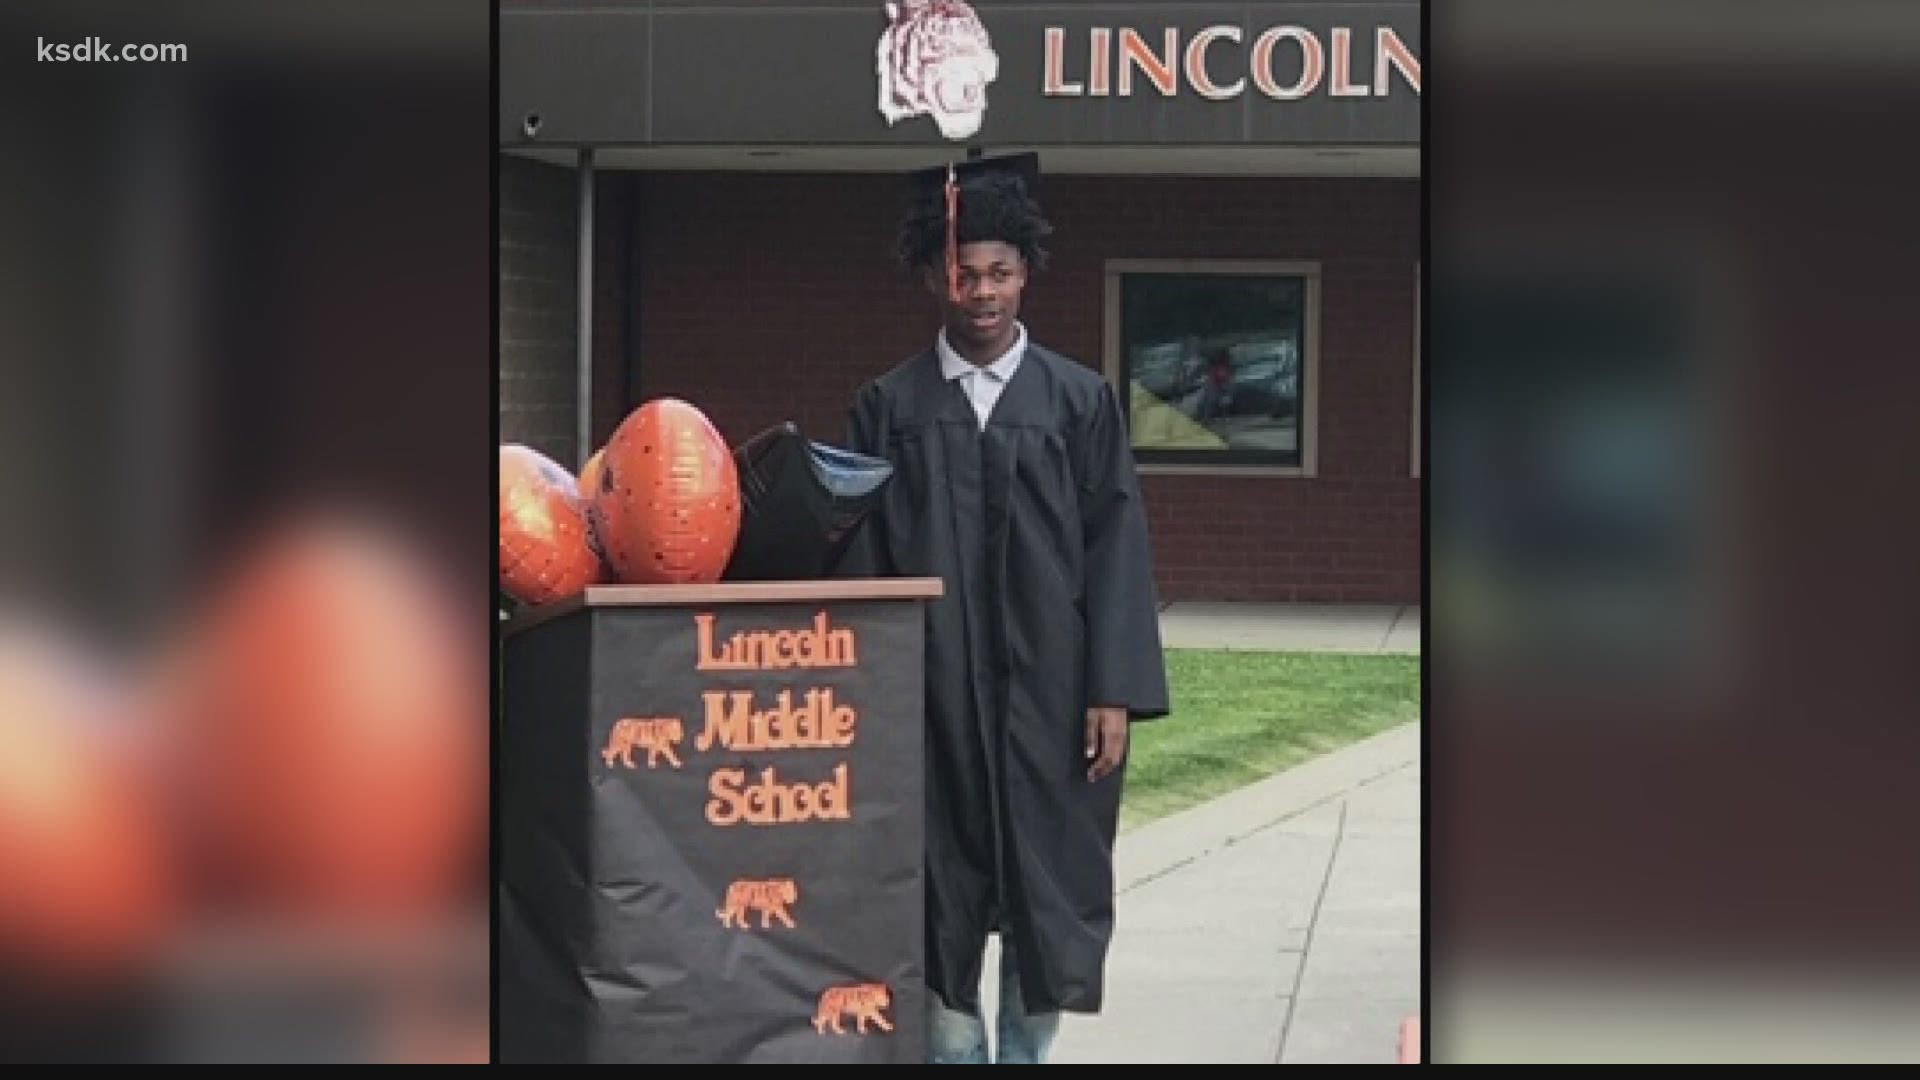 "He was looking forward to celebrating his birthday next month and going to high school in the fall," say relatives of Kyeiontae "Keon" Stidimire.